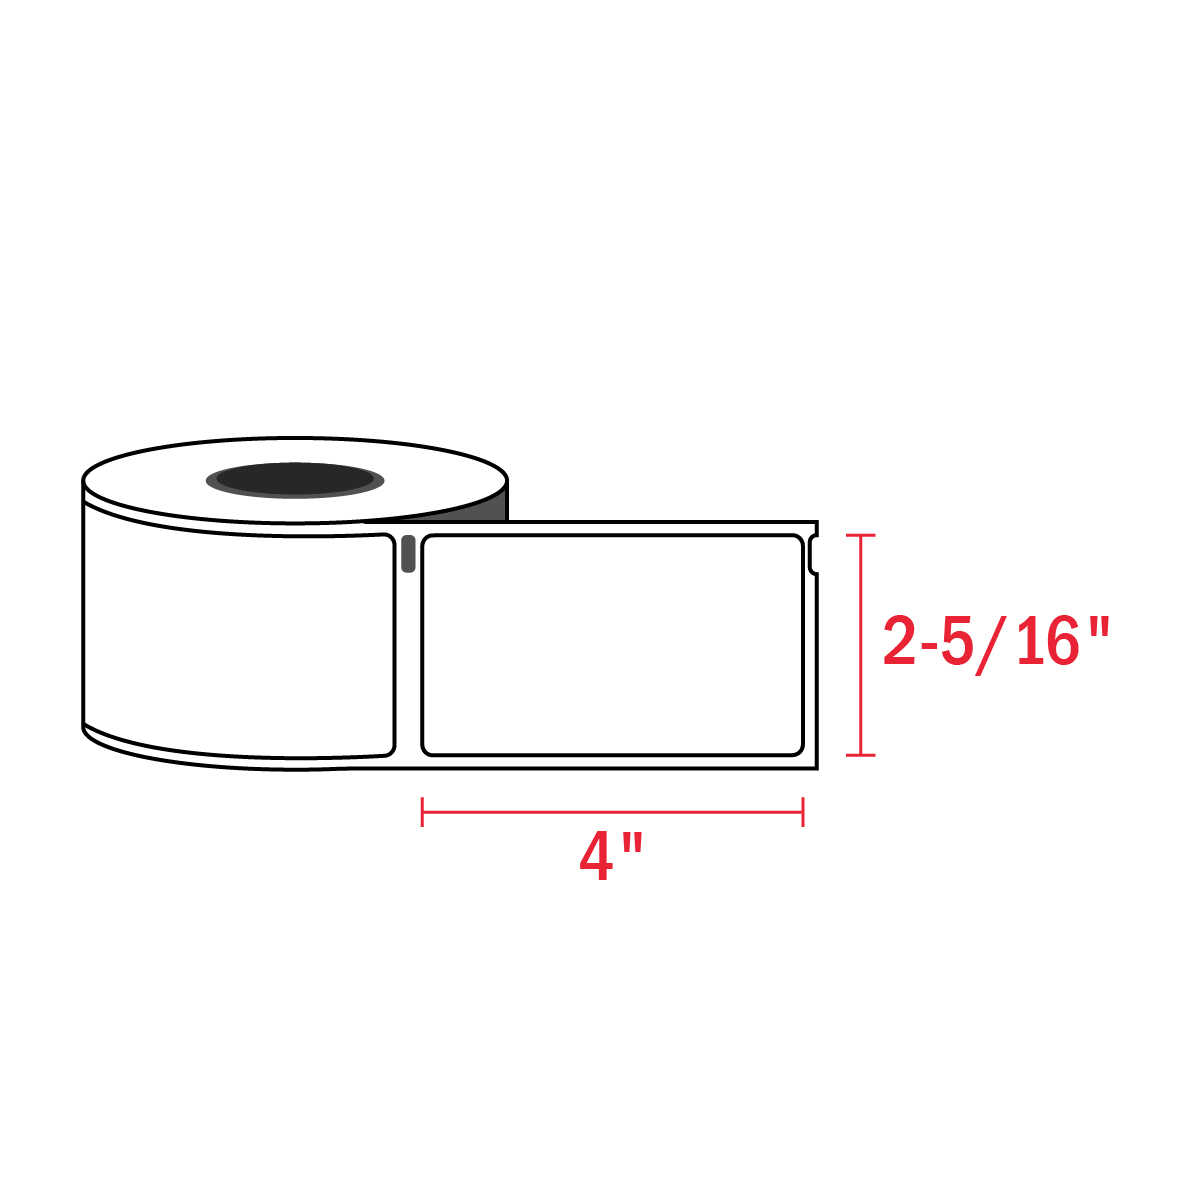 Compatible Dymo 30256 Labels 2-5/16" x 4" White Shipping Label